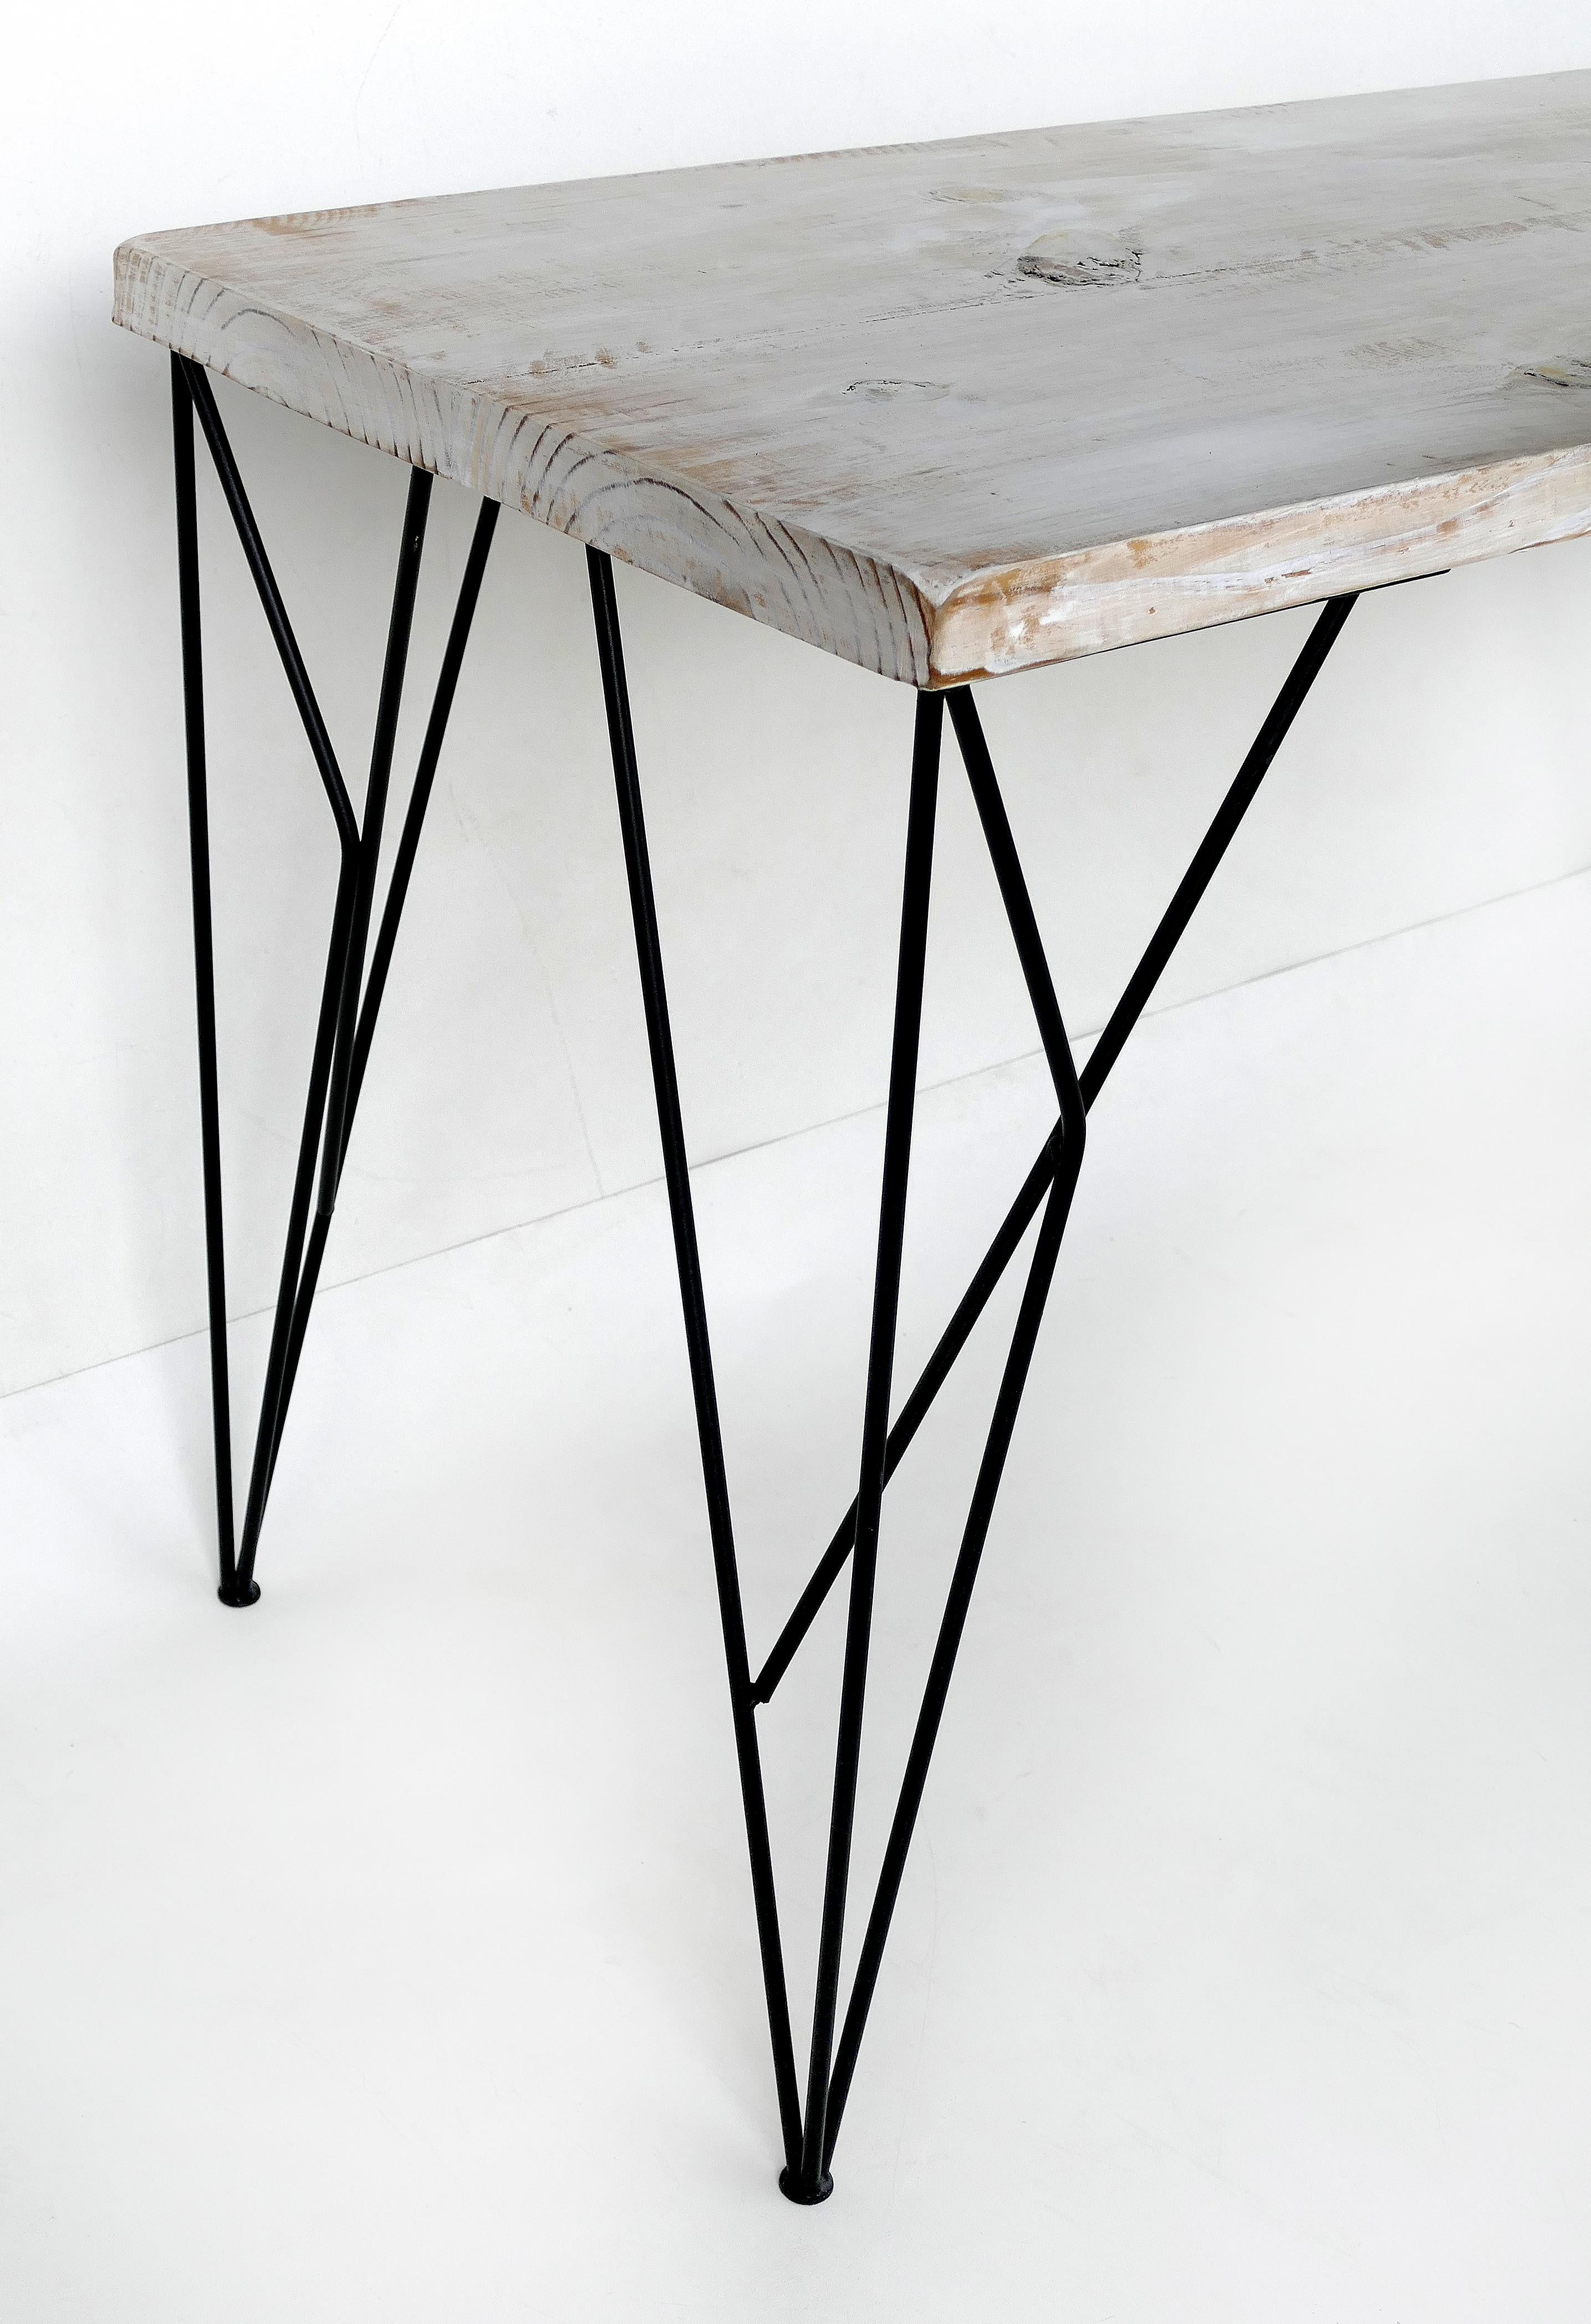 American Rustic Whitewashed Console/Work Table with Iron Legs